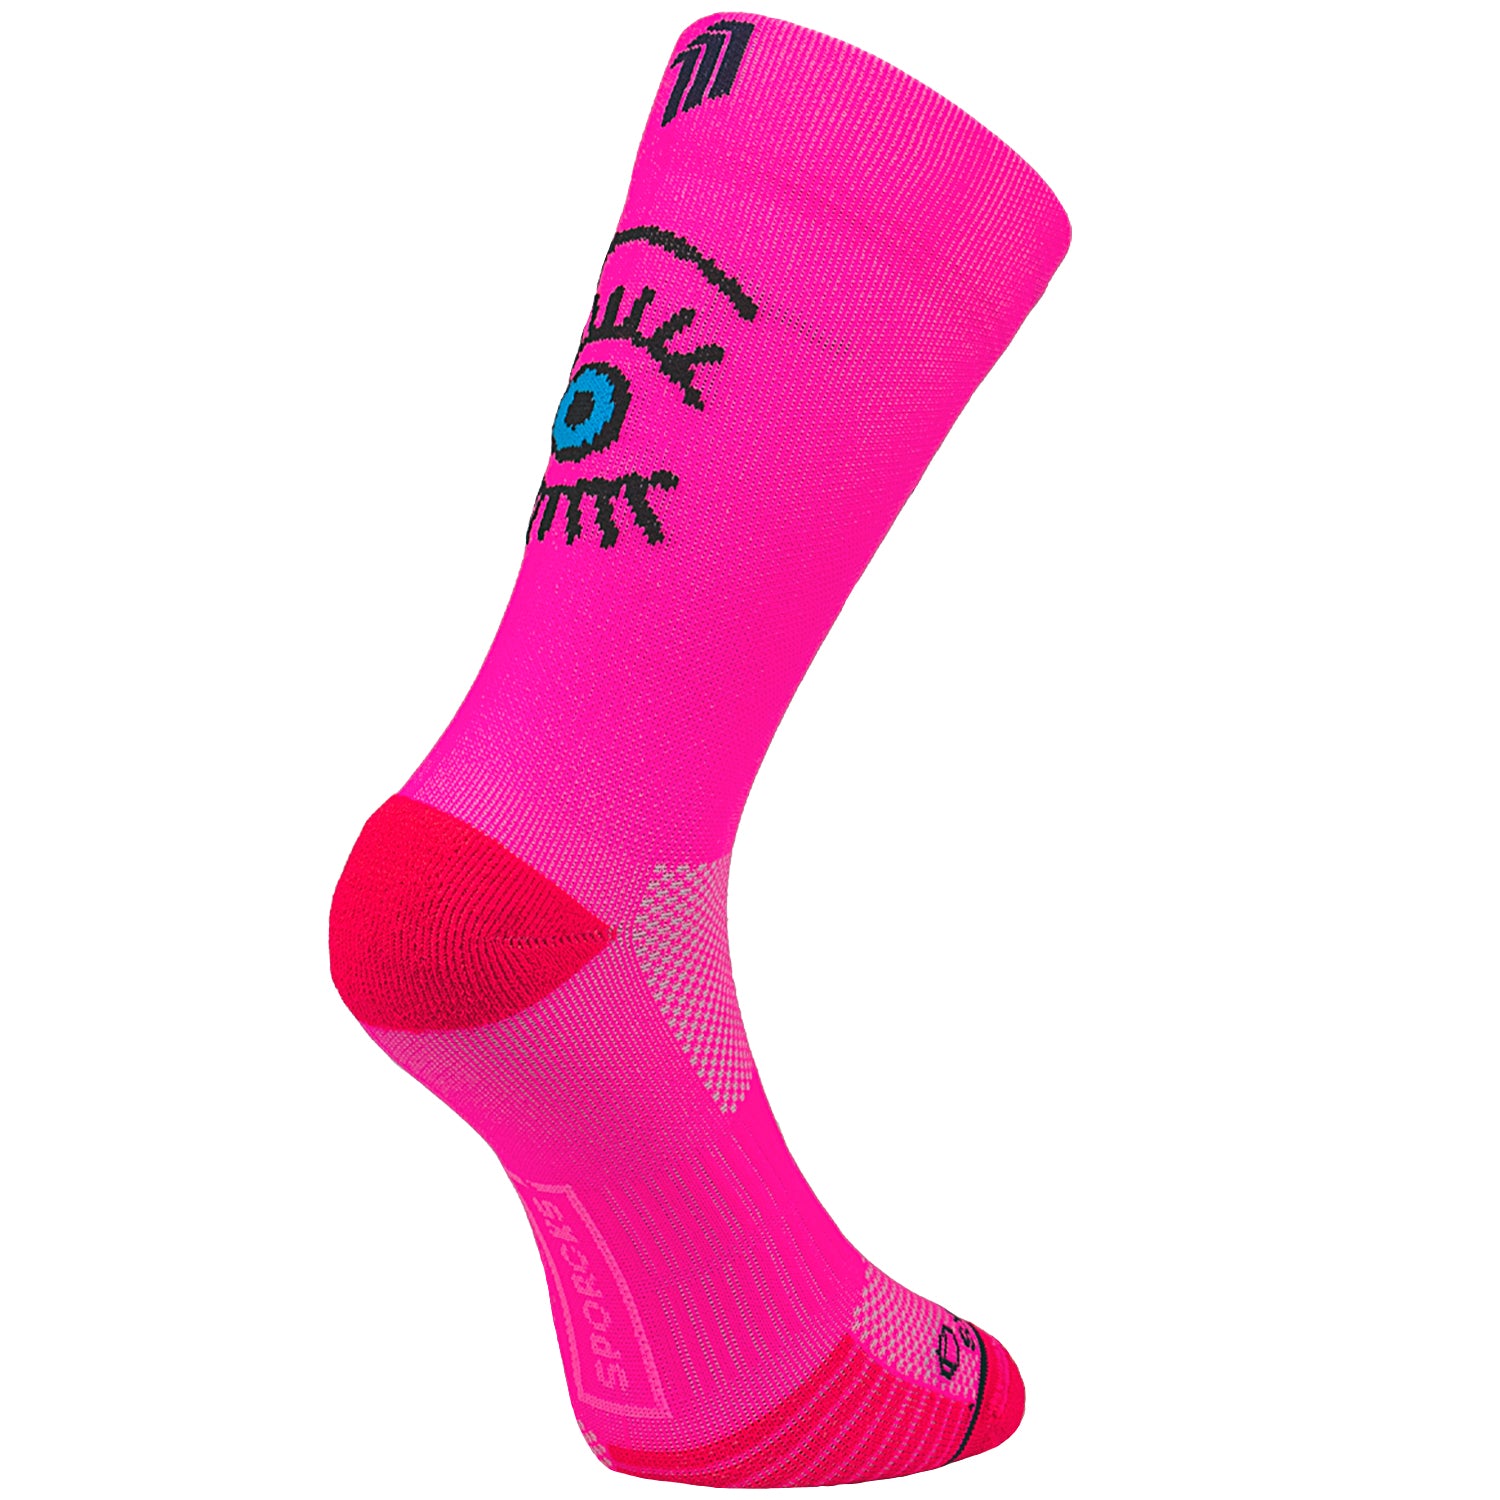 CALCETINES BE STRONG FUCSIA DE RUNNING